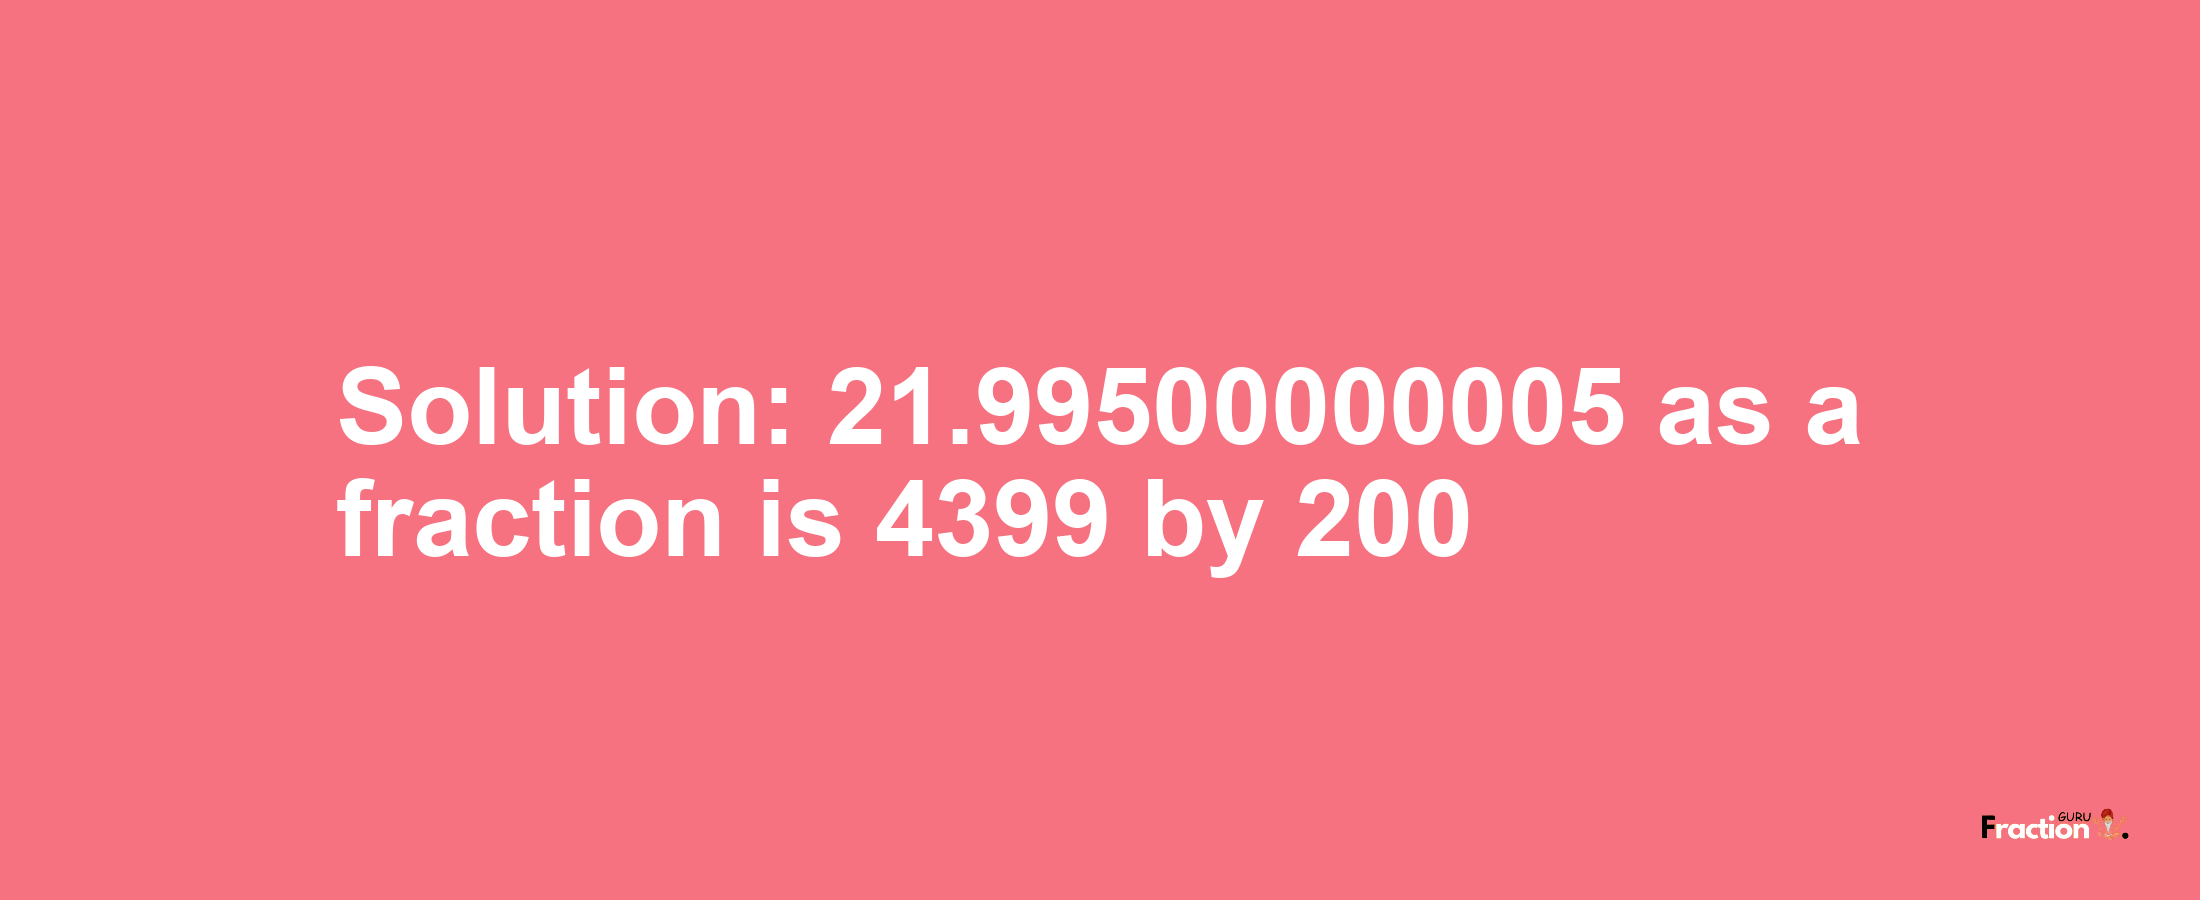 Solution:21.99500000005 as a fraction is 4399/200